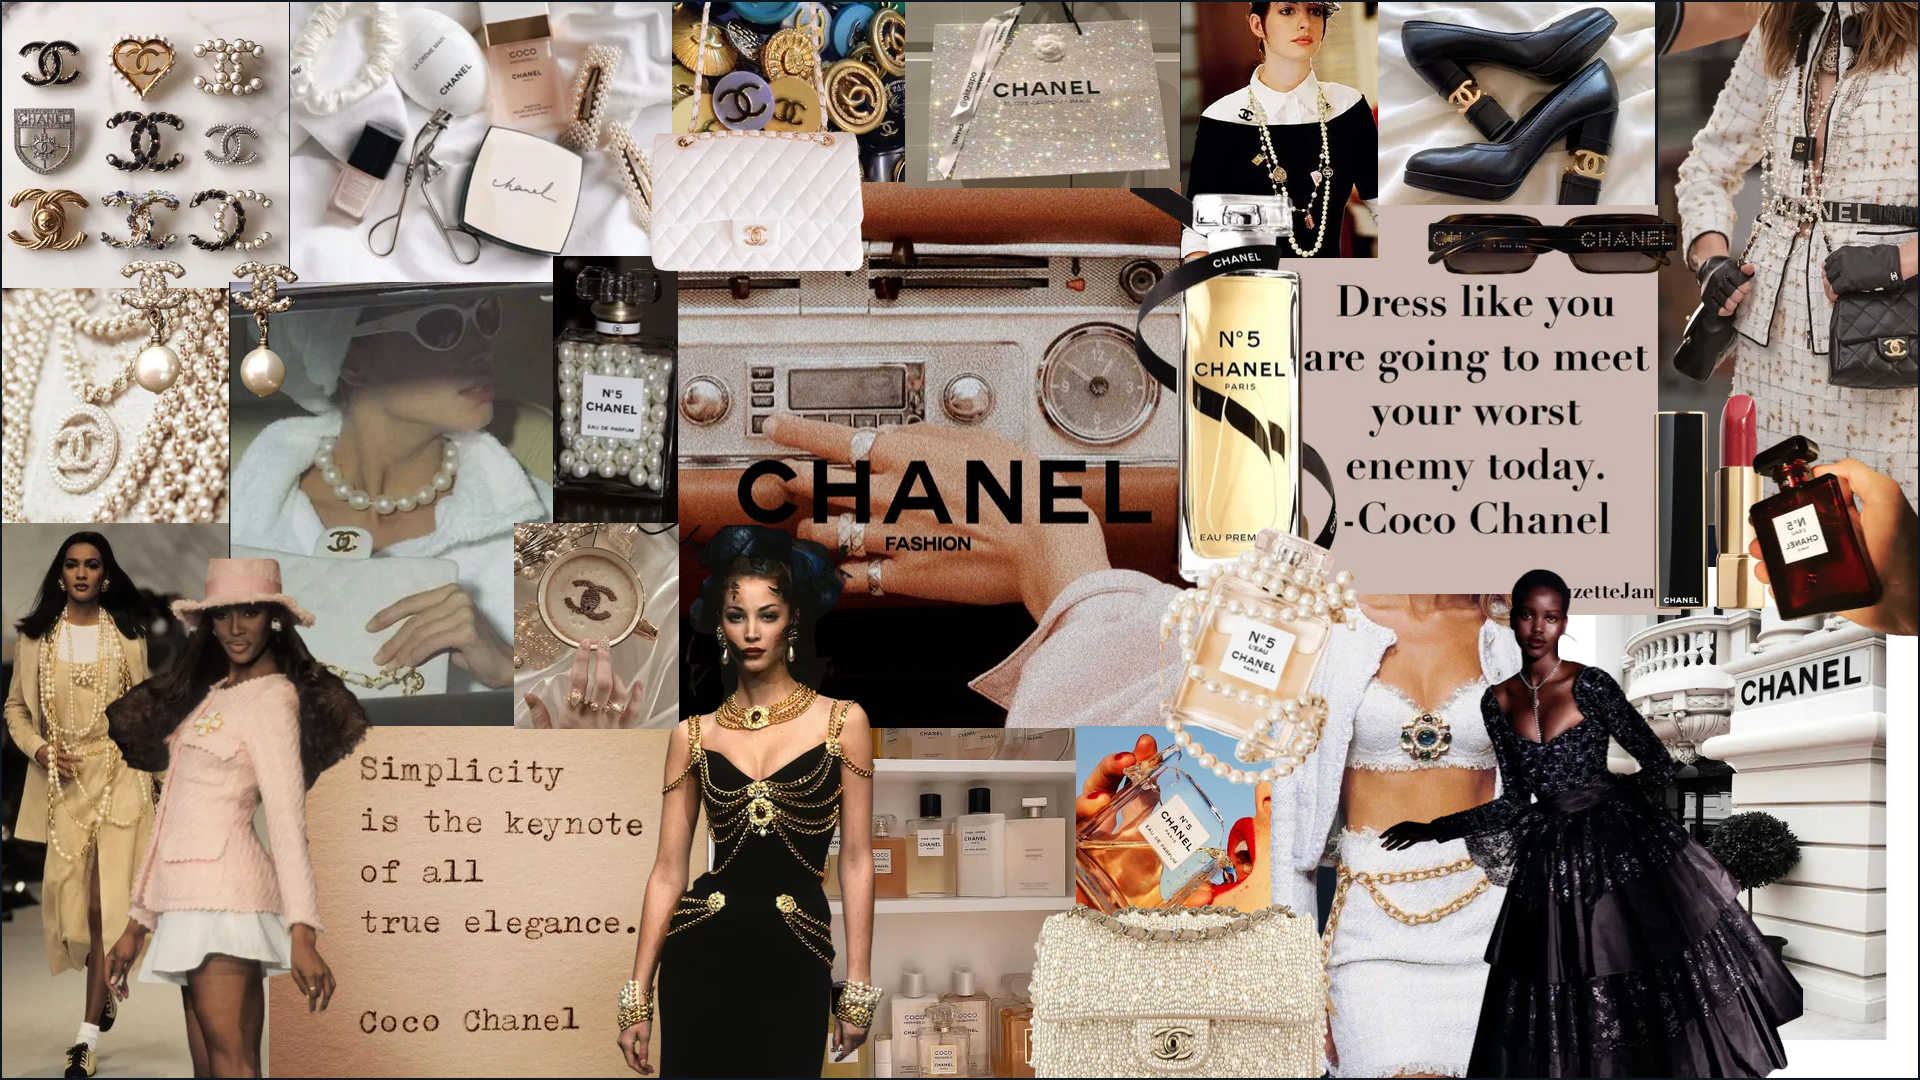 Landing | Chanel (part 2/10 of the Haute Couture series)